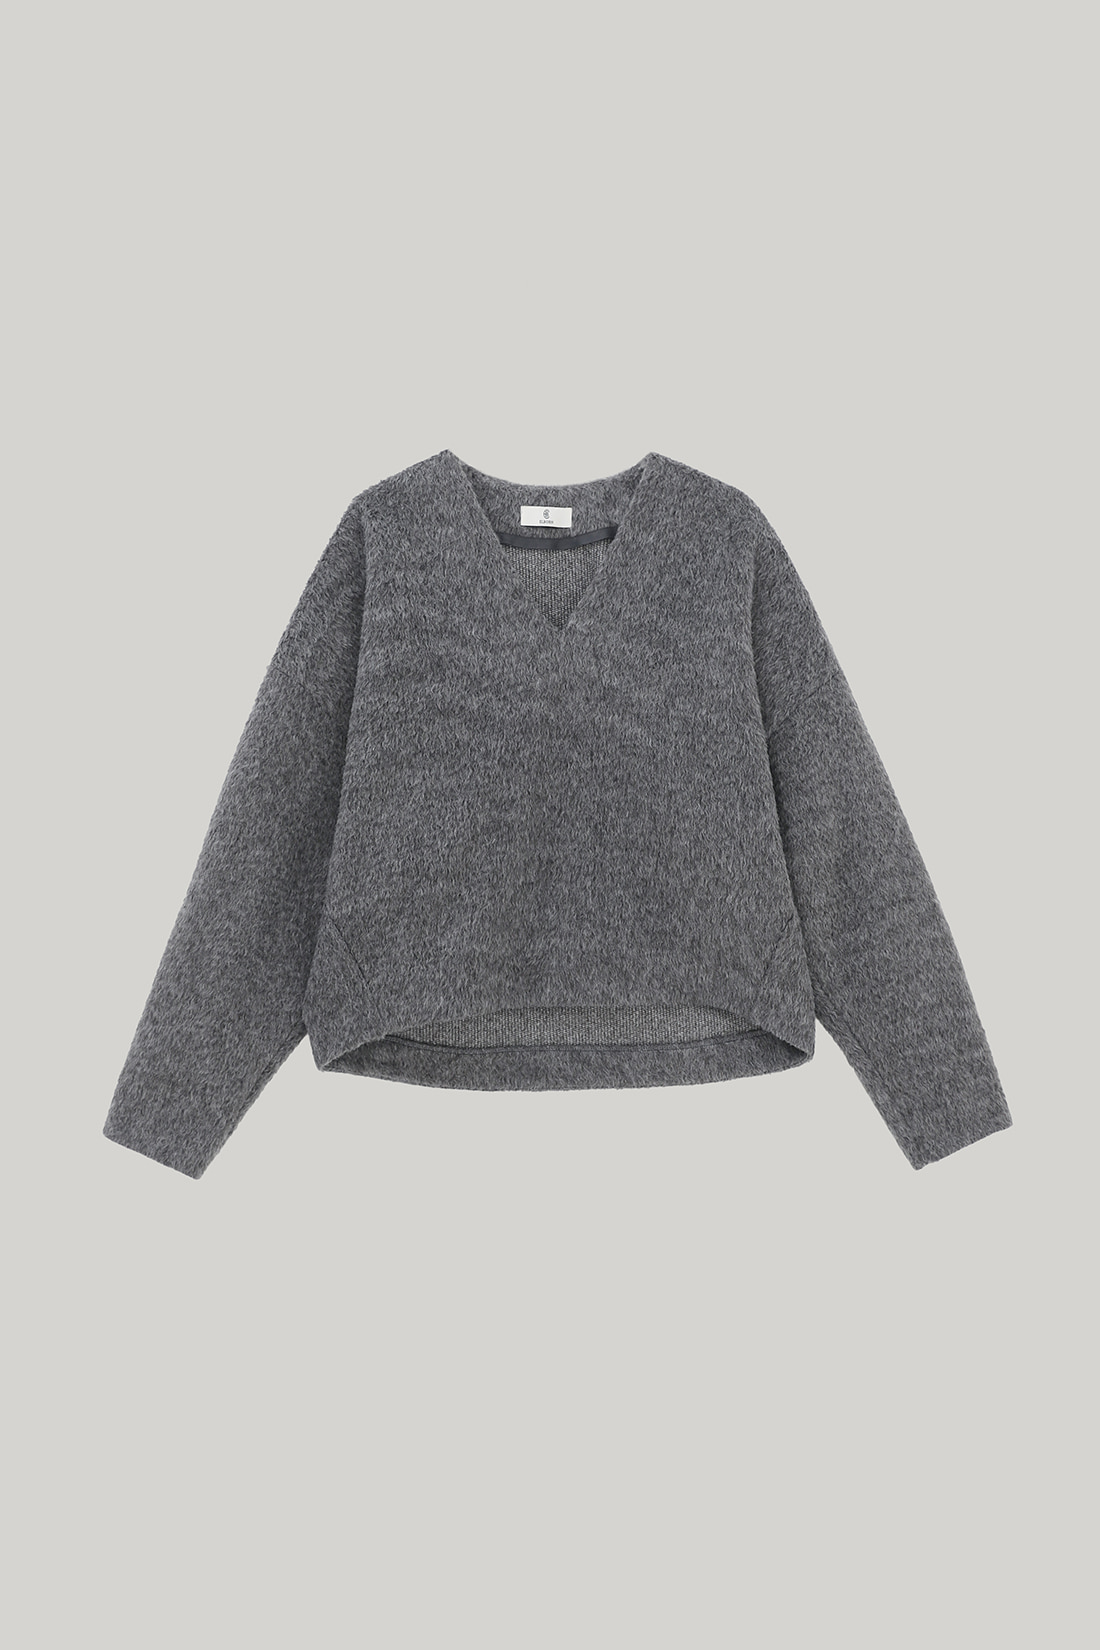 2ND / Cleo V-Neck Sweater Top (2colors)